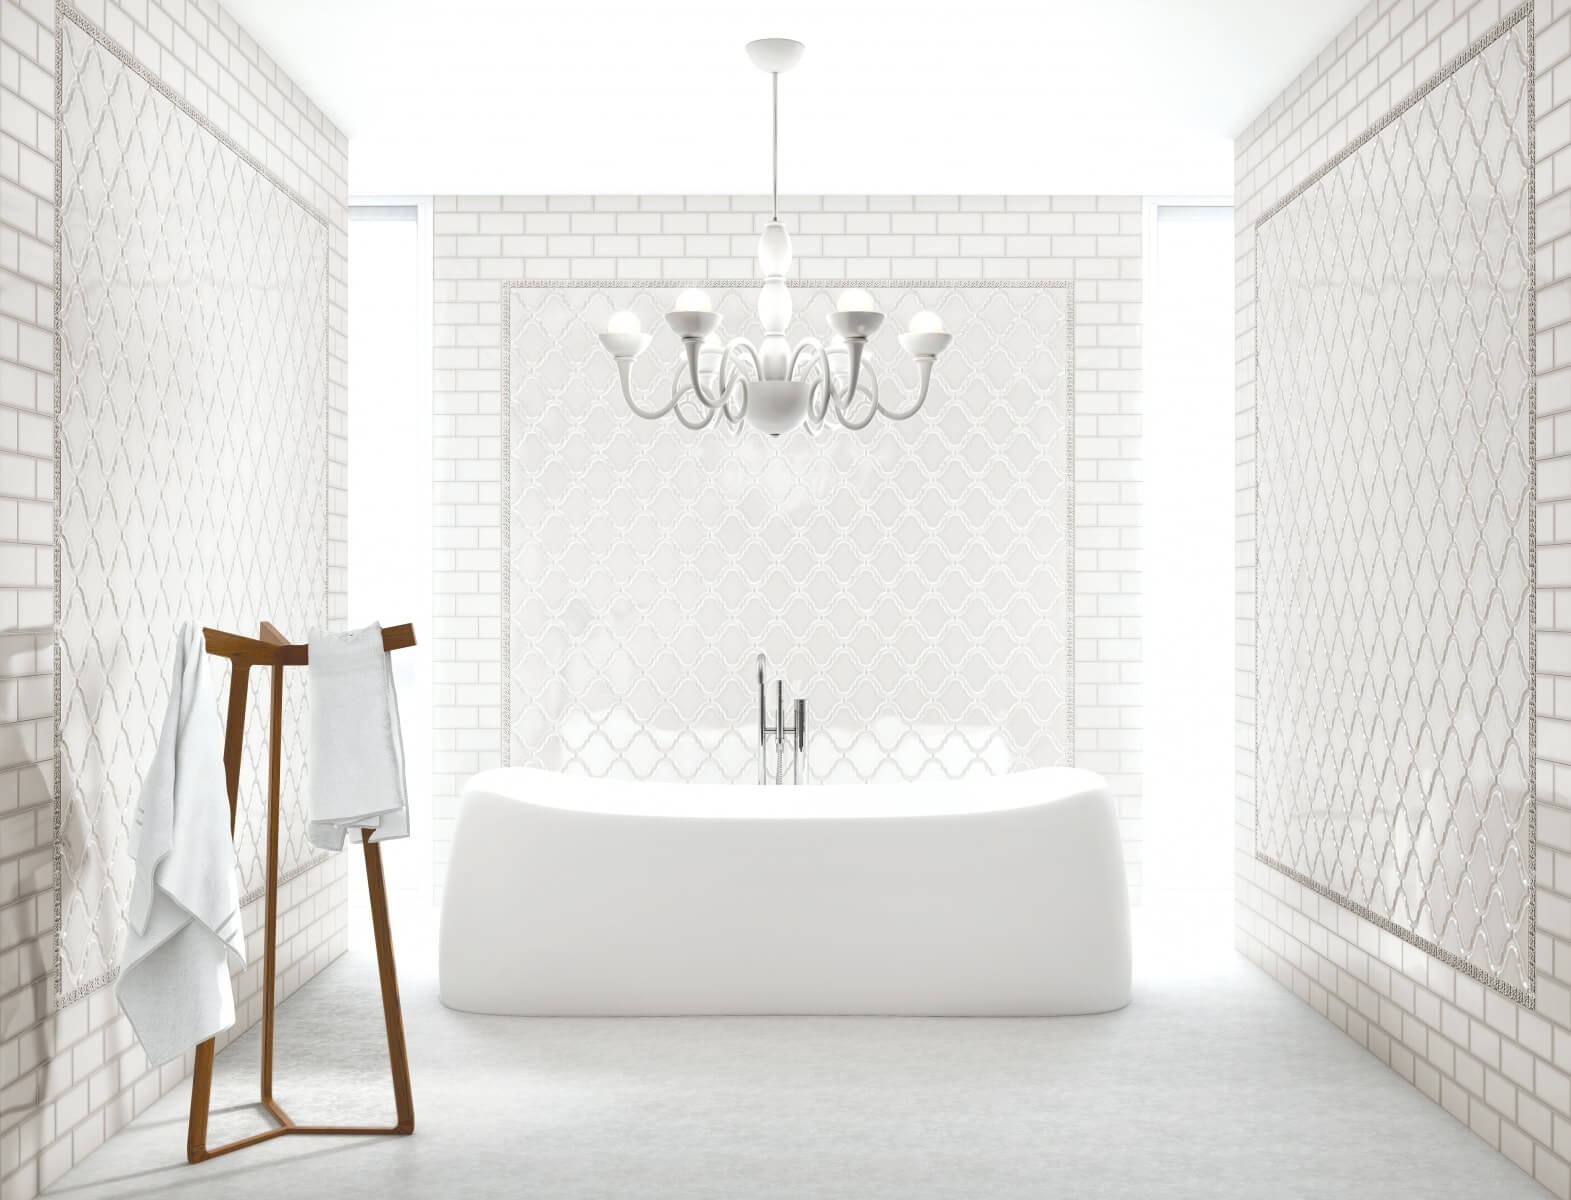 Create interest with ceramic tile patterns